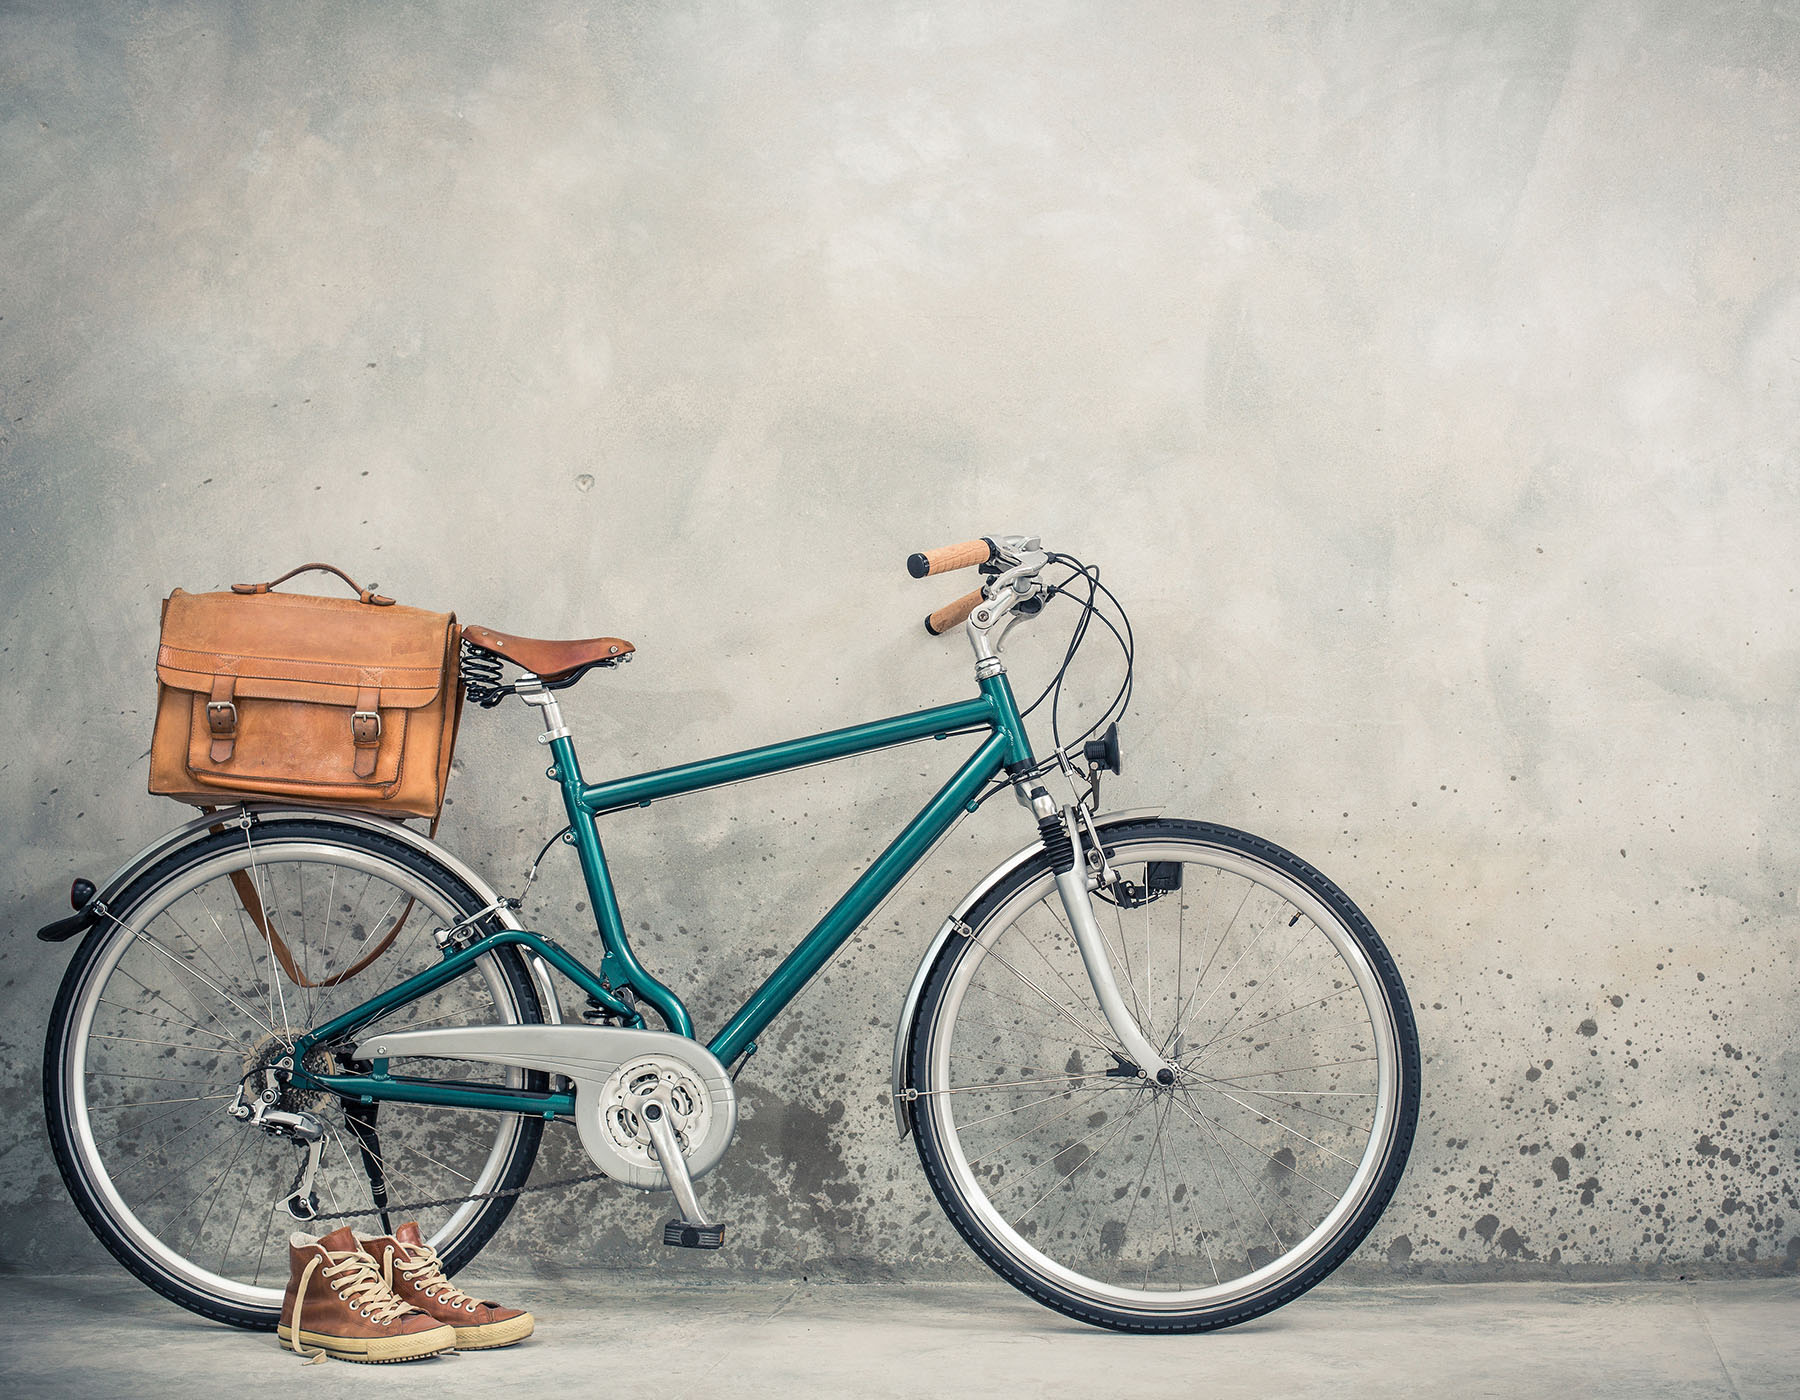 Retro bike with aged leather postman's bag and old sneakers fron